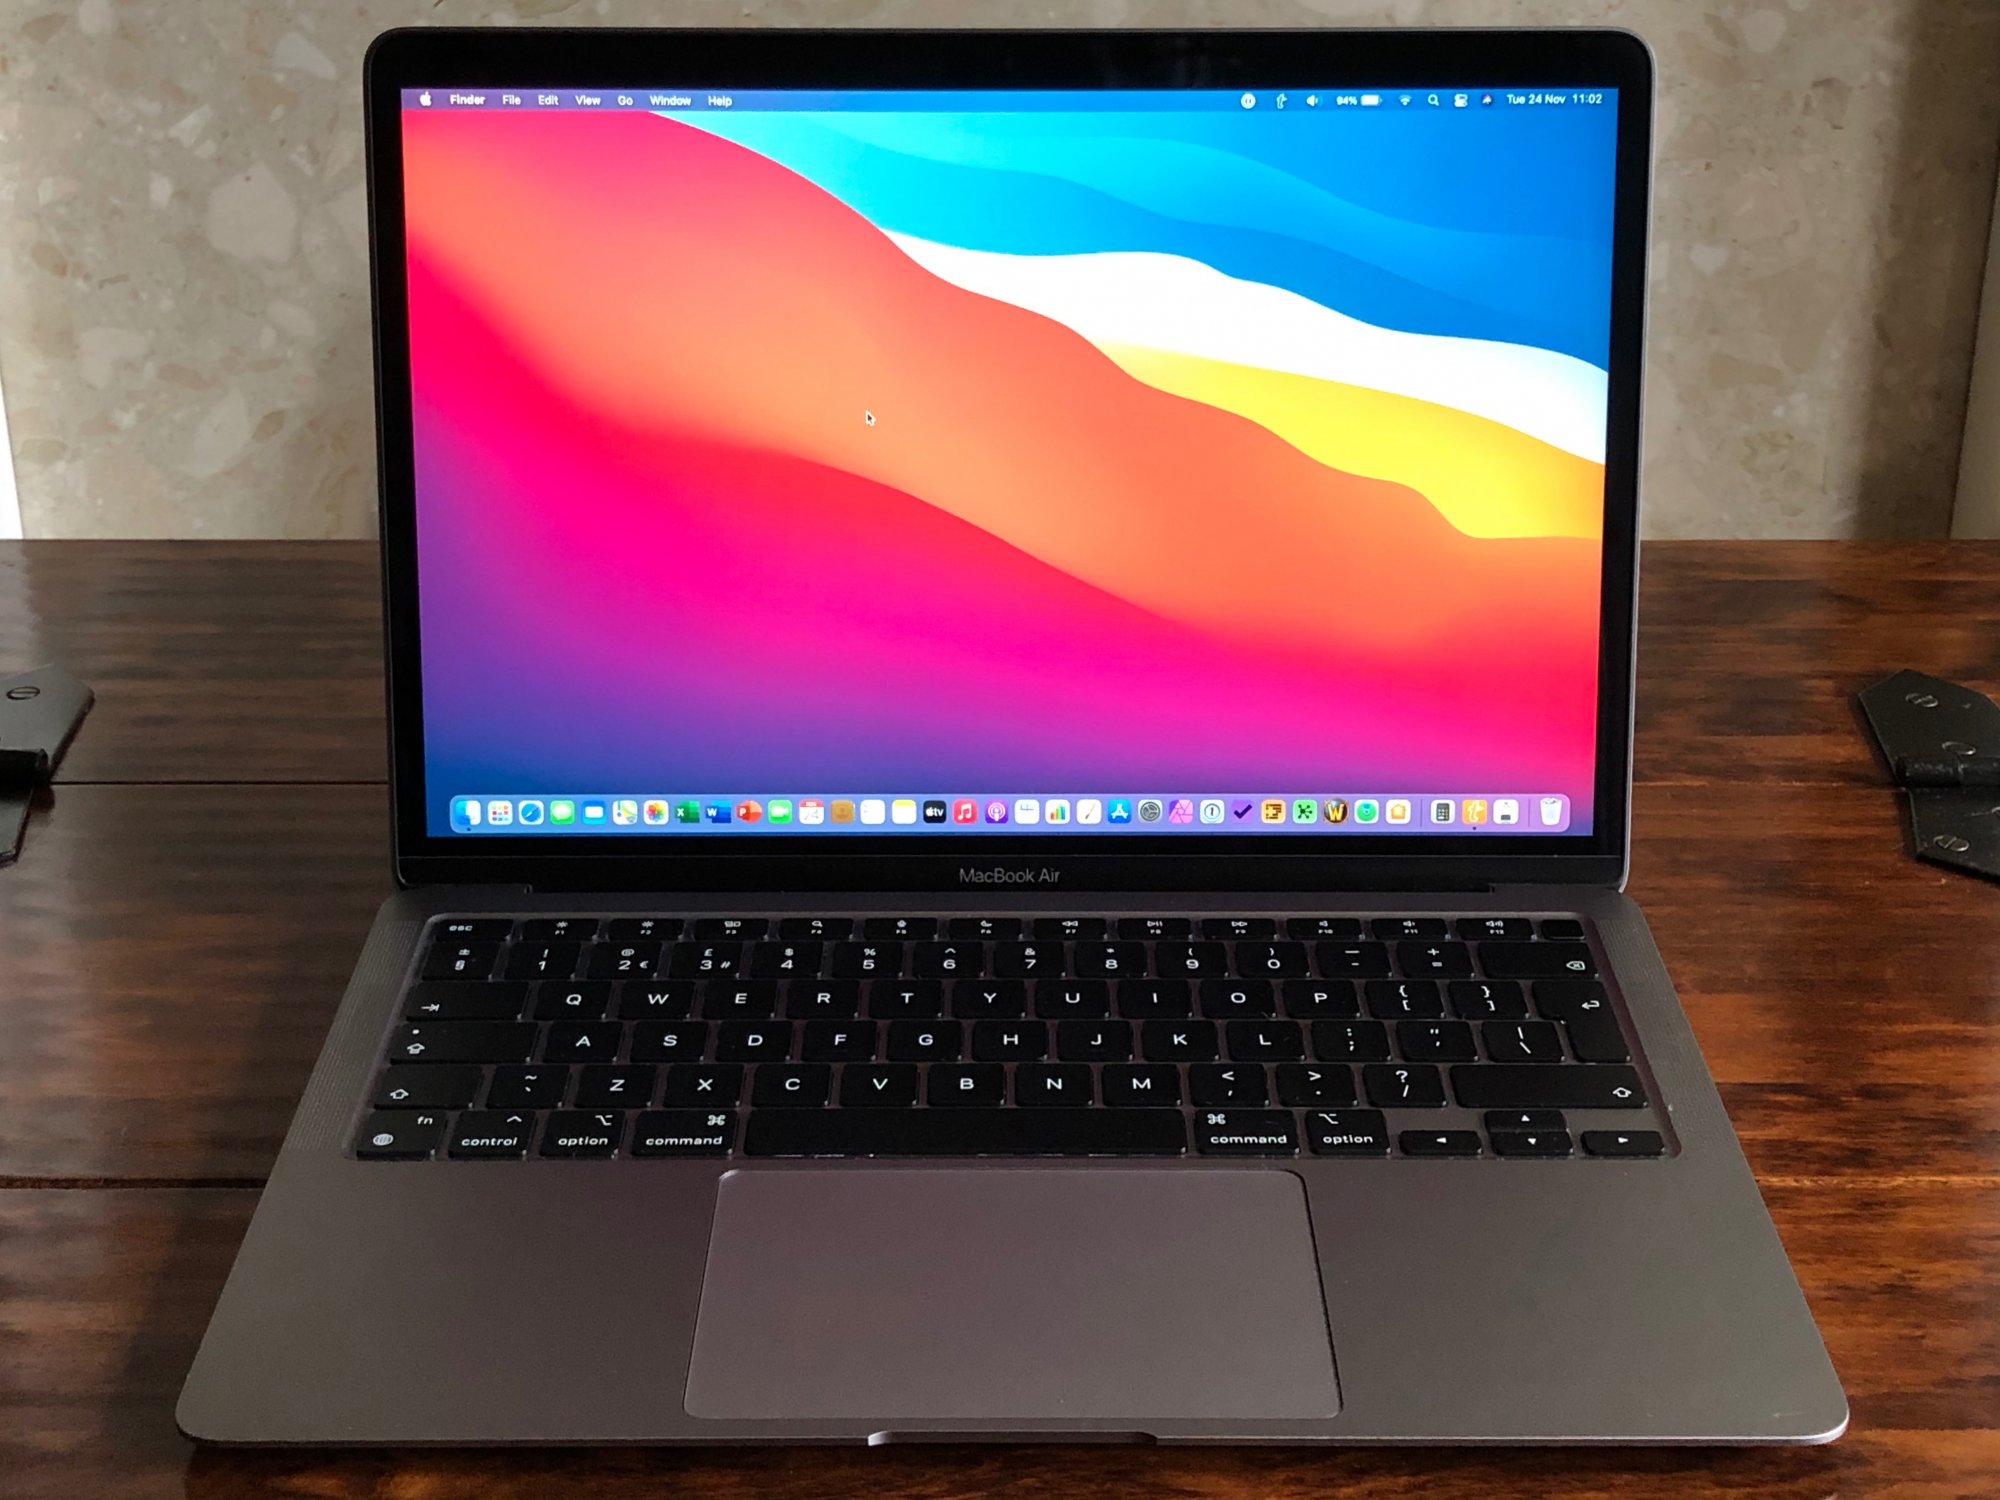 MacBook Air M1 ,1 Week Review, Switch from 15” MBP | MacRumors Forums